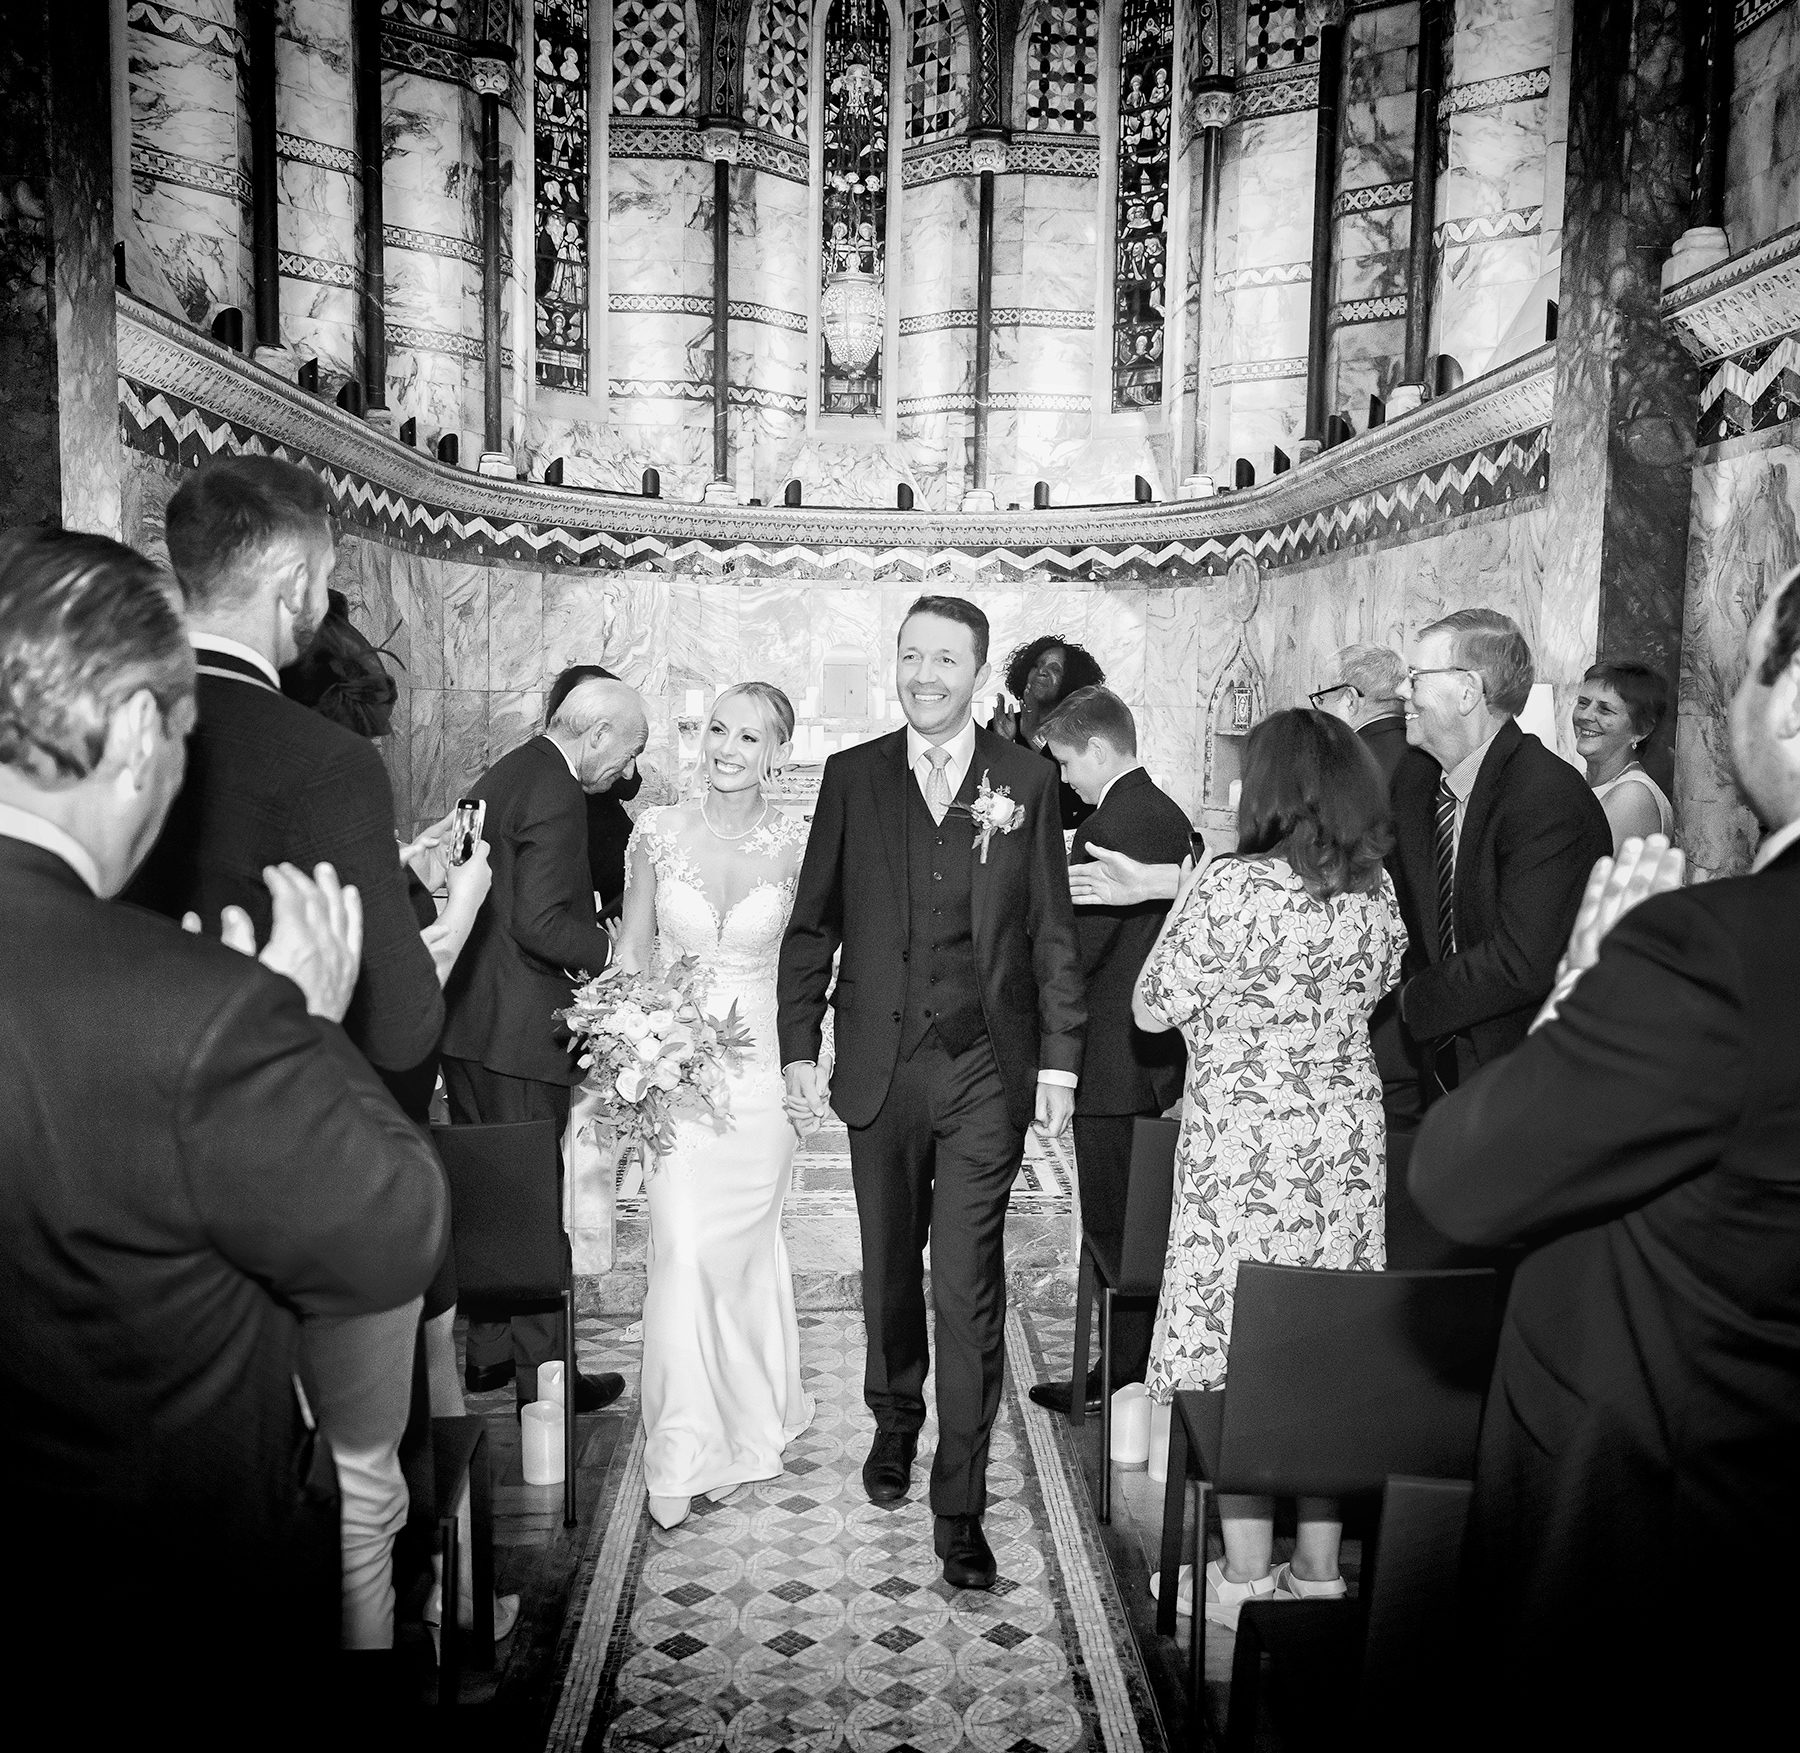 Wedding recessional at Fitzrovia Chapel Westminster London